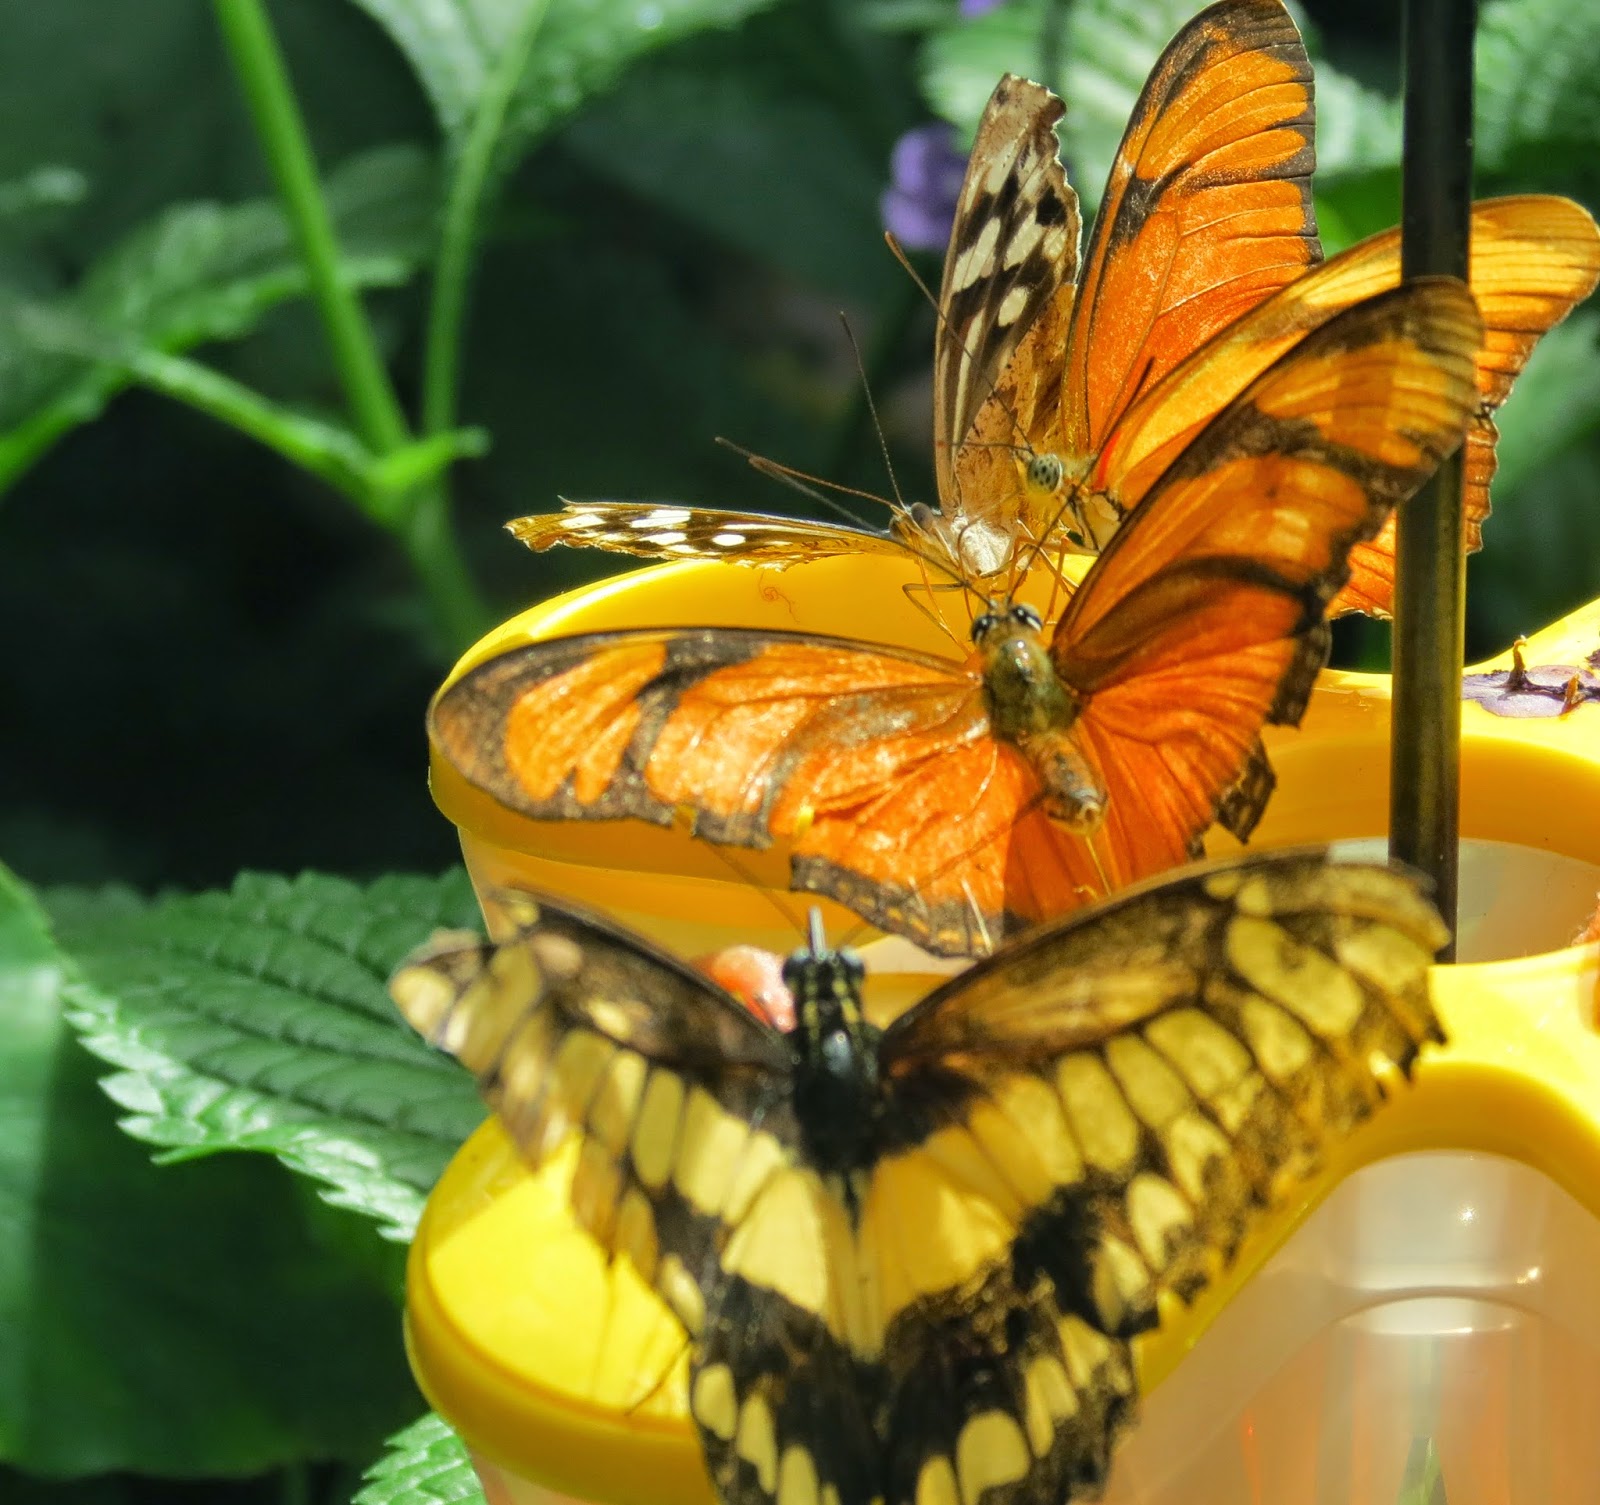 Adventures in PEI and Beyond!: The Butterfly Conservatory, Niagara Falls, Ontario